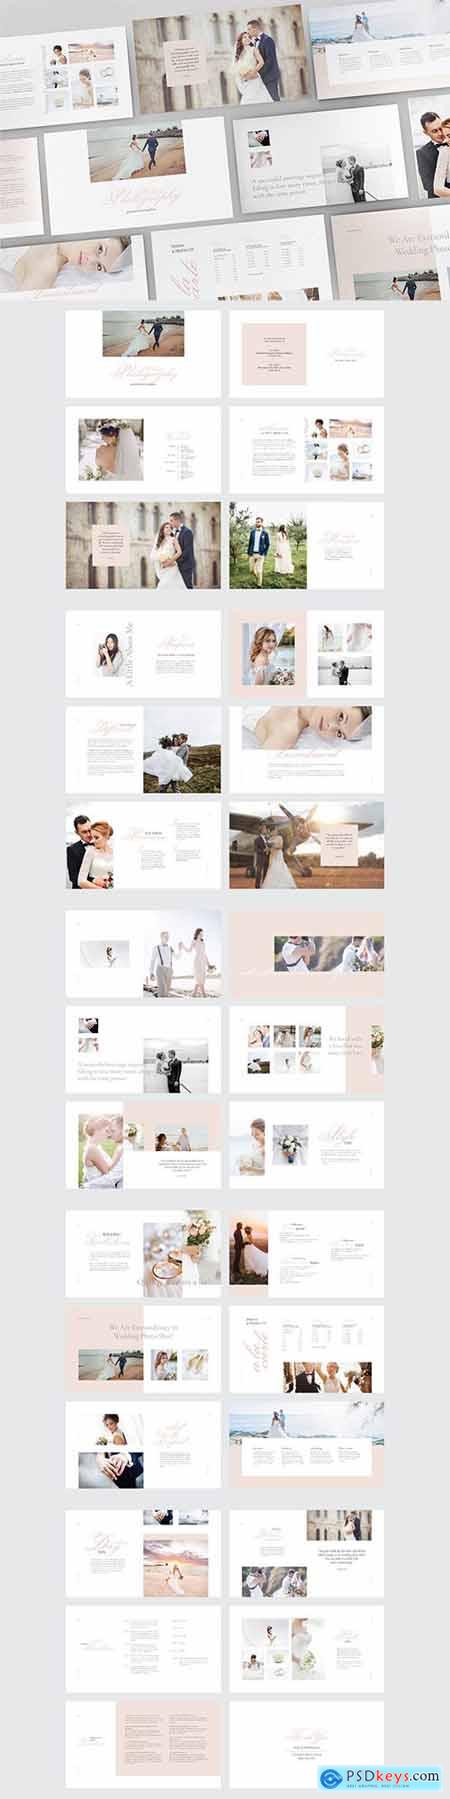 WEDDING PHOTOGRAPHY - Powerpoint Template V99